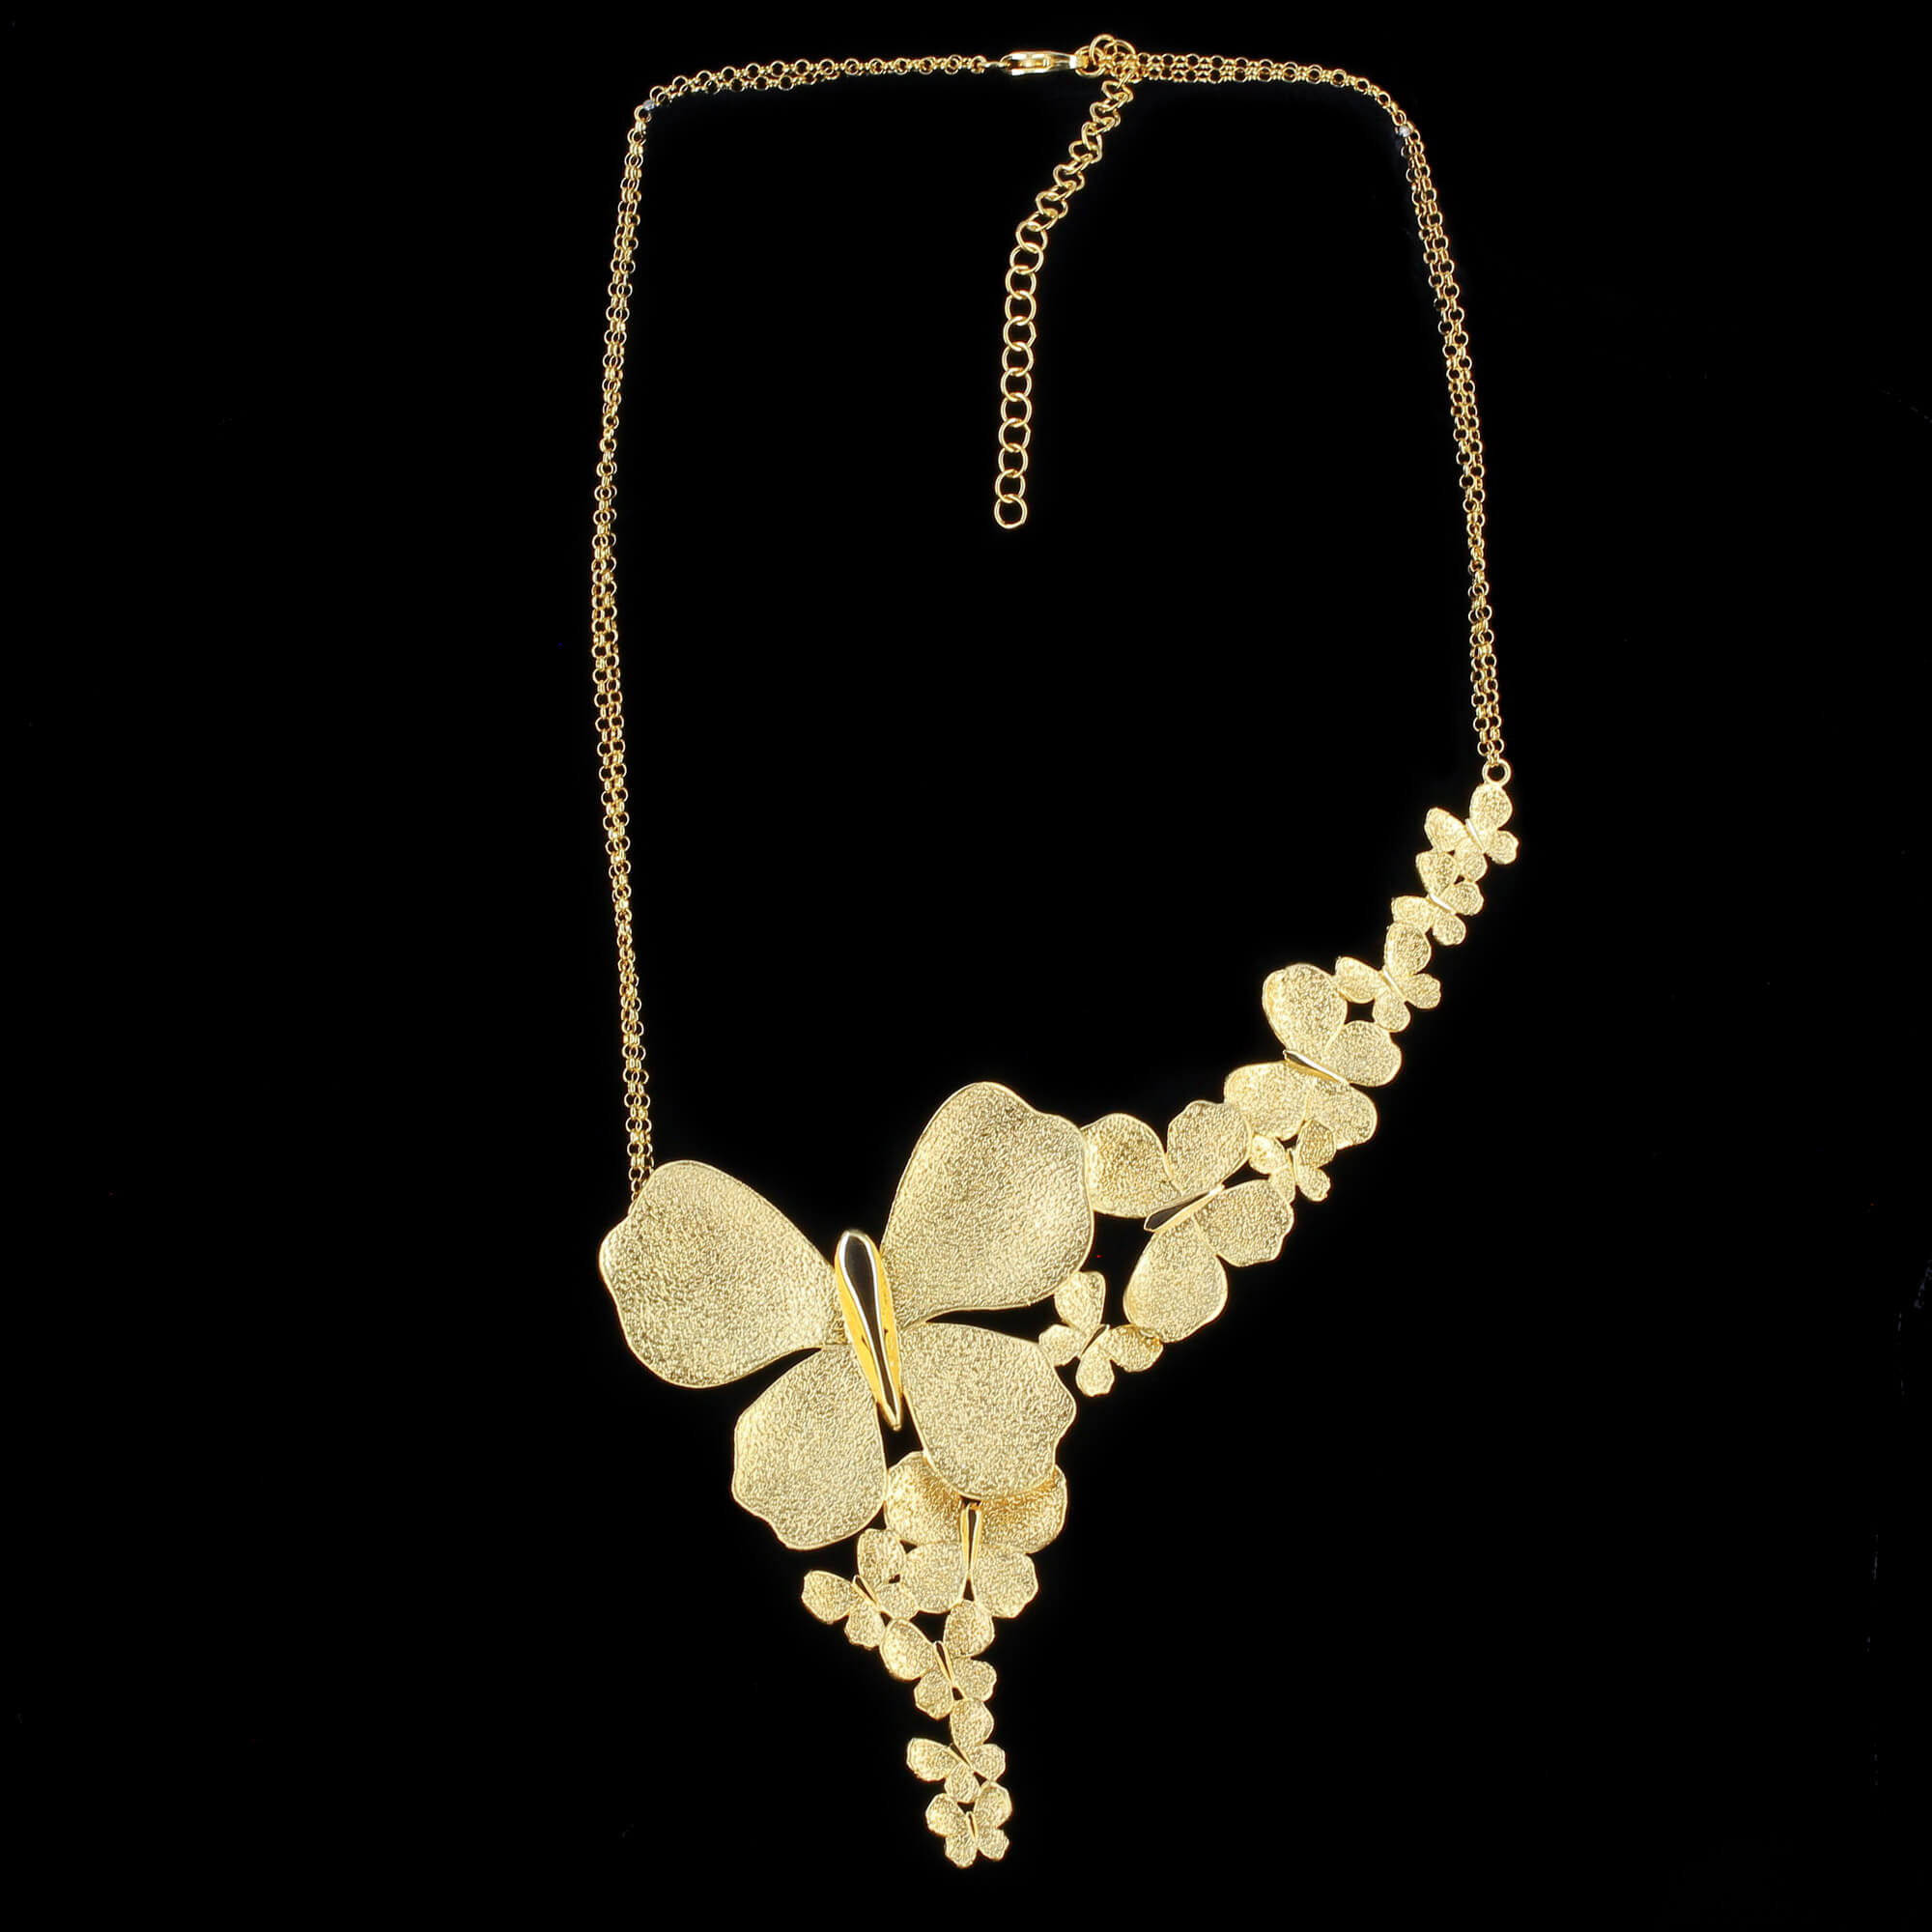 Gilded necklace with a few butterflies